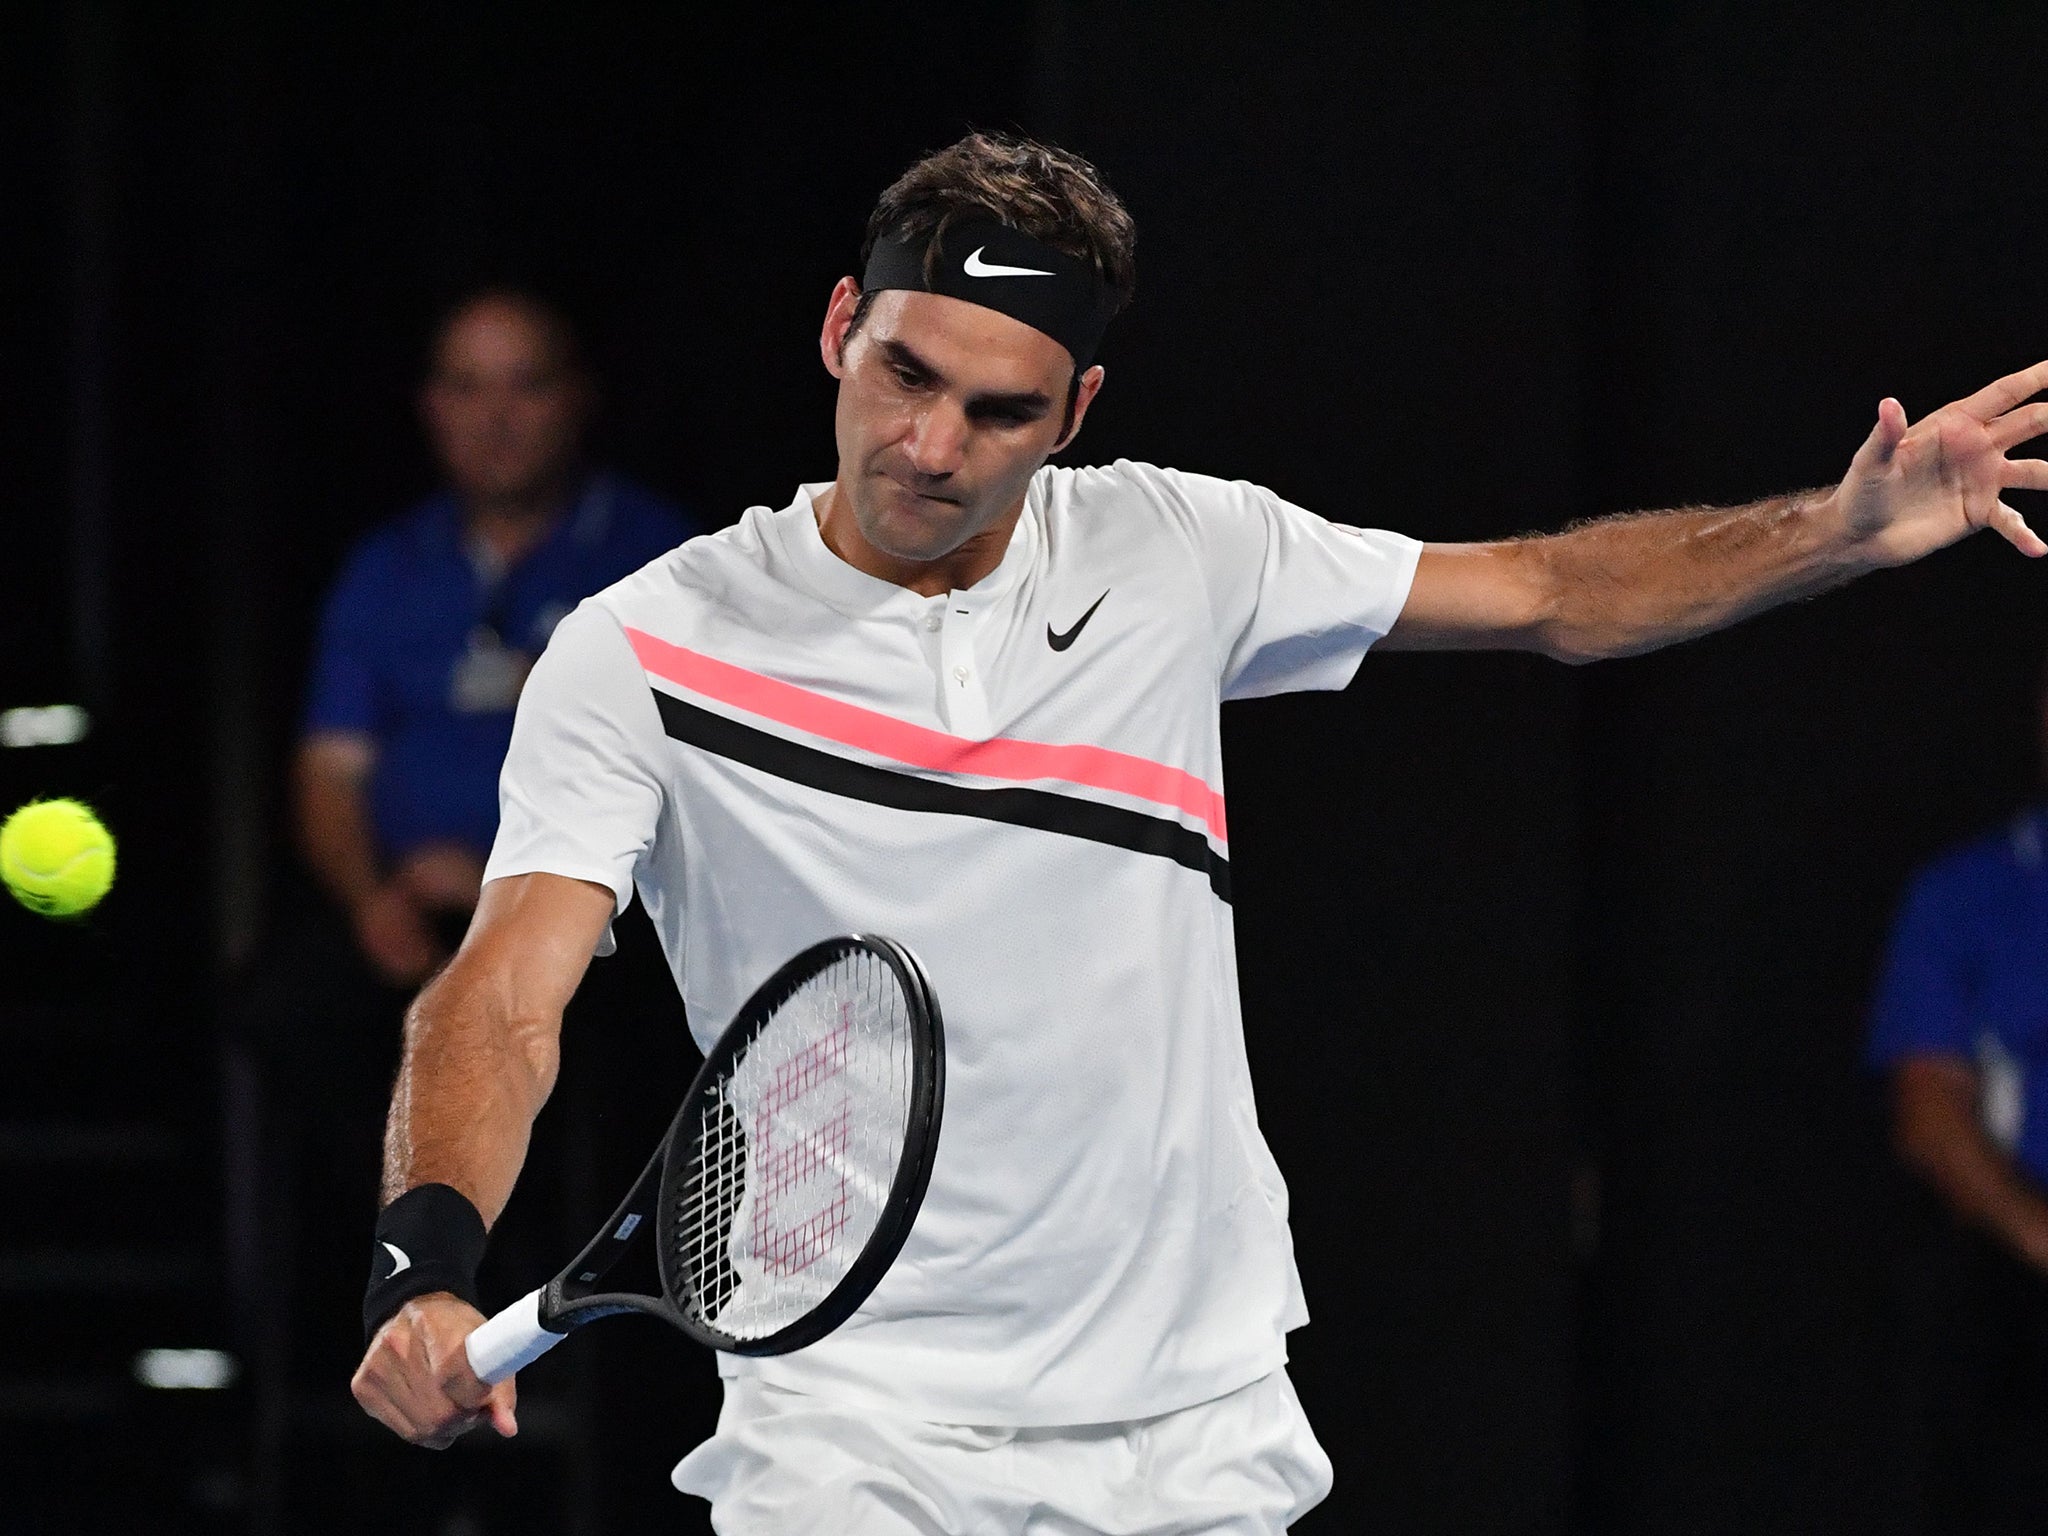 Federer was cruising as he closed in on a two-set lead when Chung retired